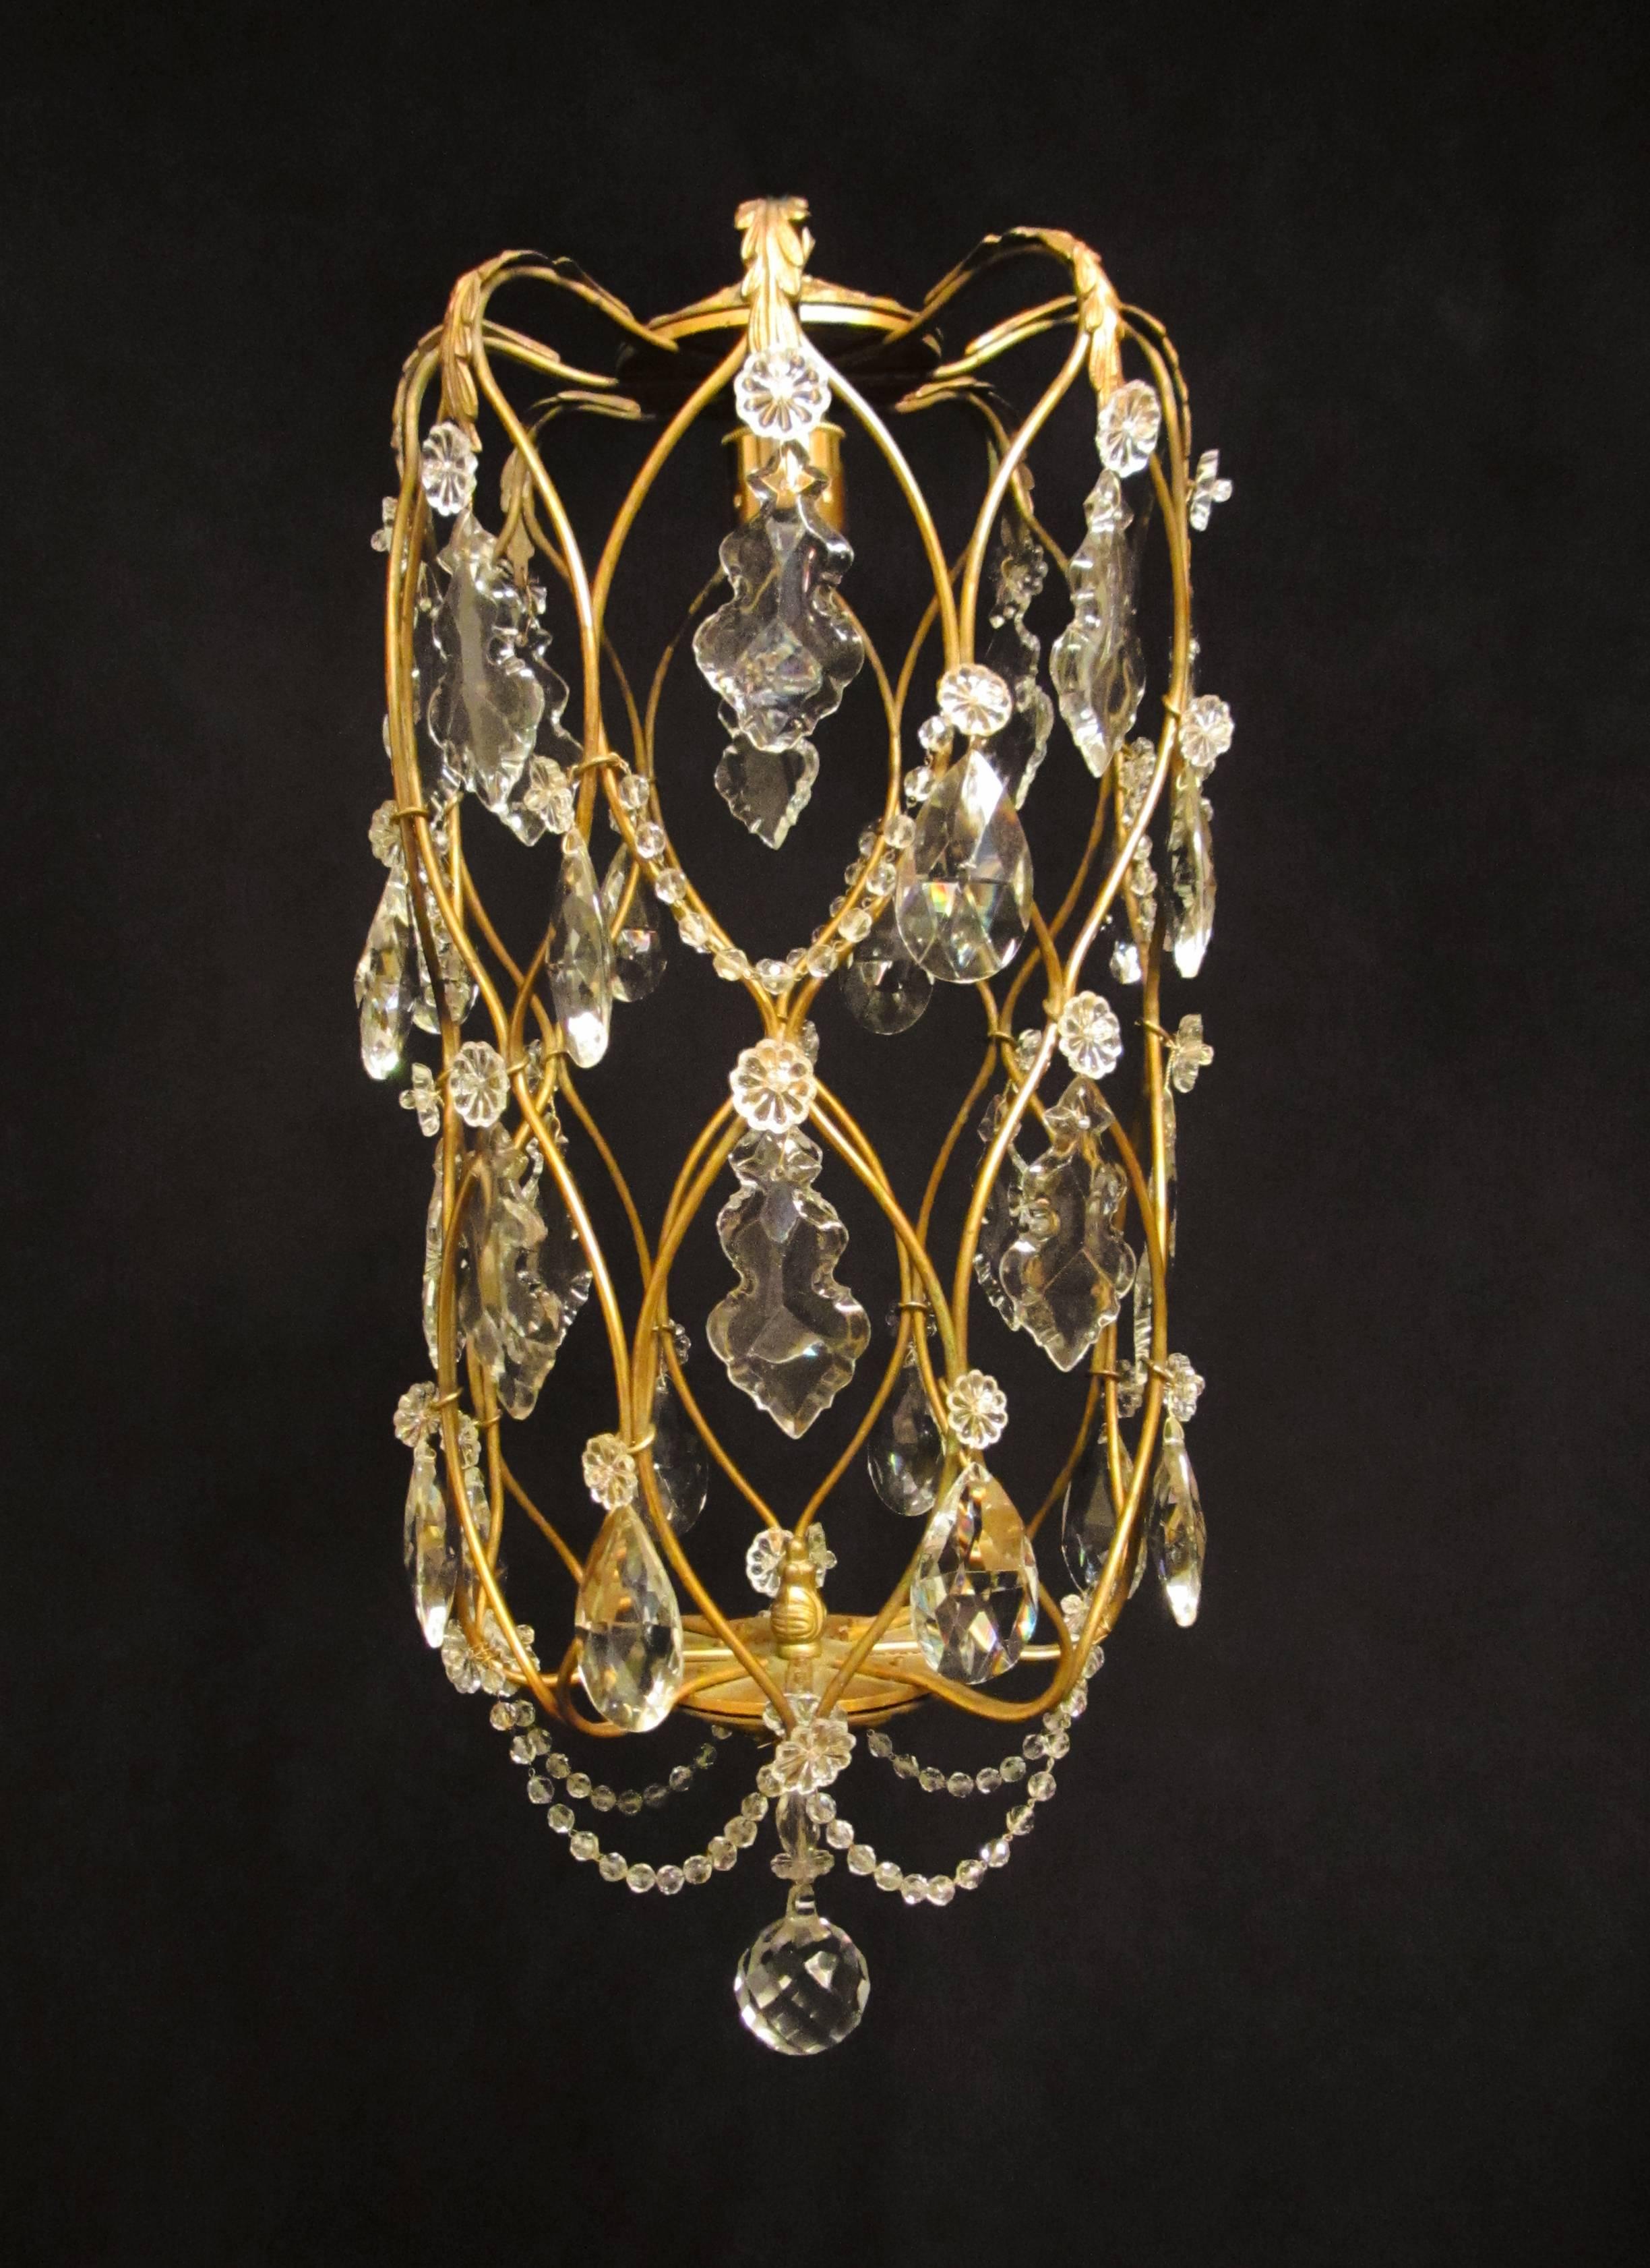 A charming gilt brass cage light, adorned with pretty cut glass plaques, rosettes and beads. 